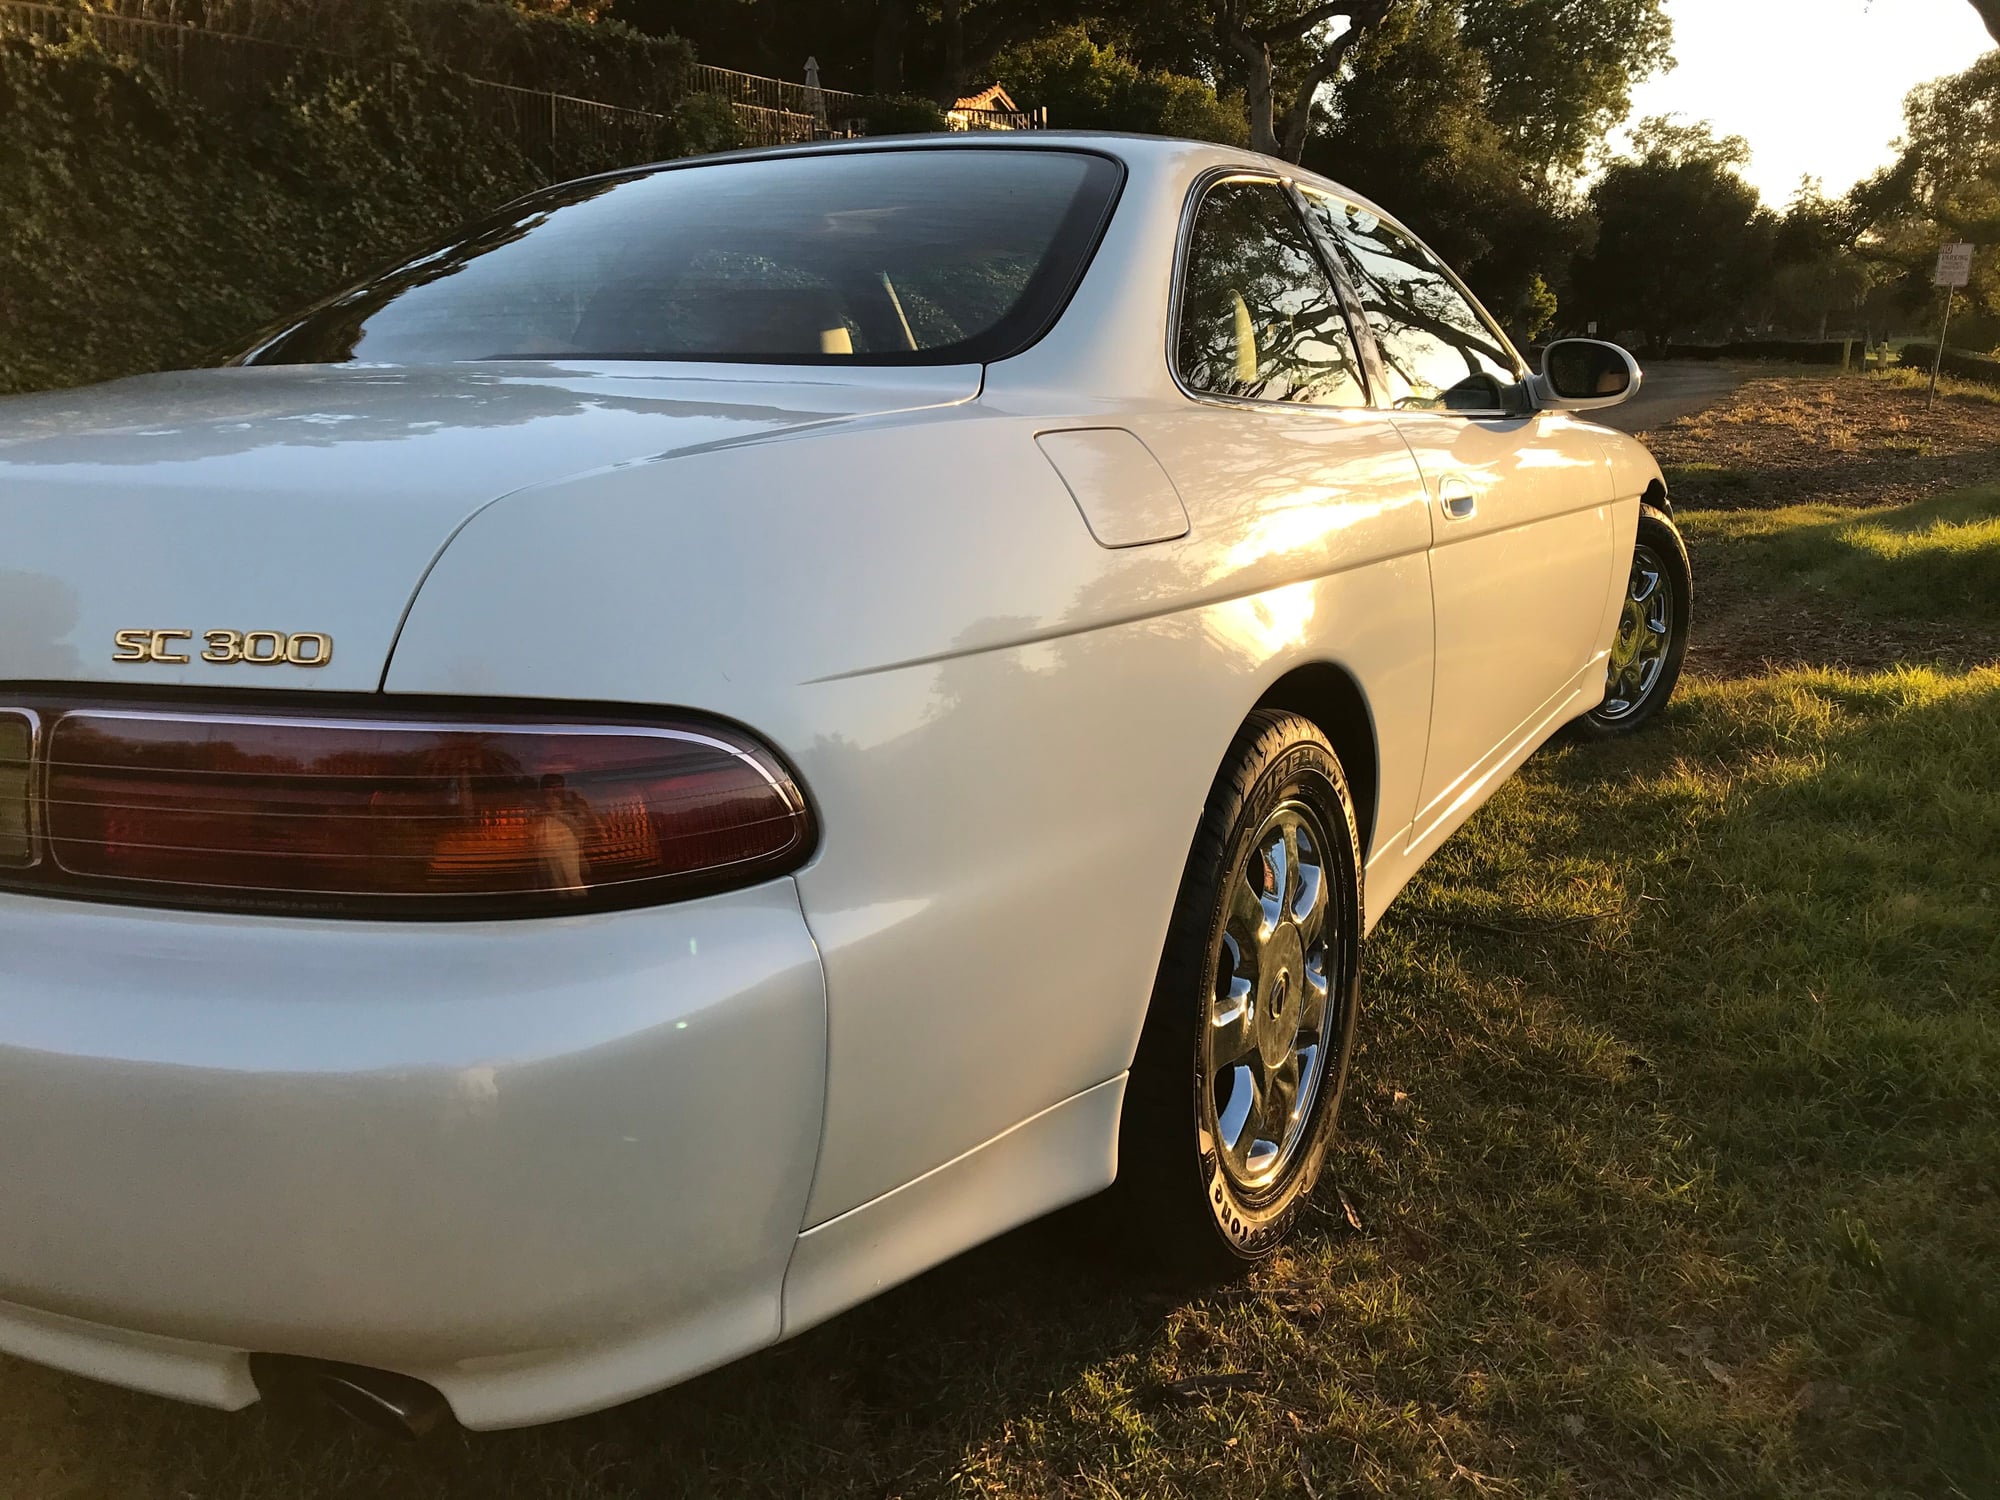 1997 Lexus SC300 - 1997 Lexus SC300 - 45,000 miles, immaculate - Used - VIN JT8CD32Z4V0038822 - 45,000 Miles - 6 cyl - 2WD - Automatic - Coupe - White - Santa Barbara, CA 93109, United States